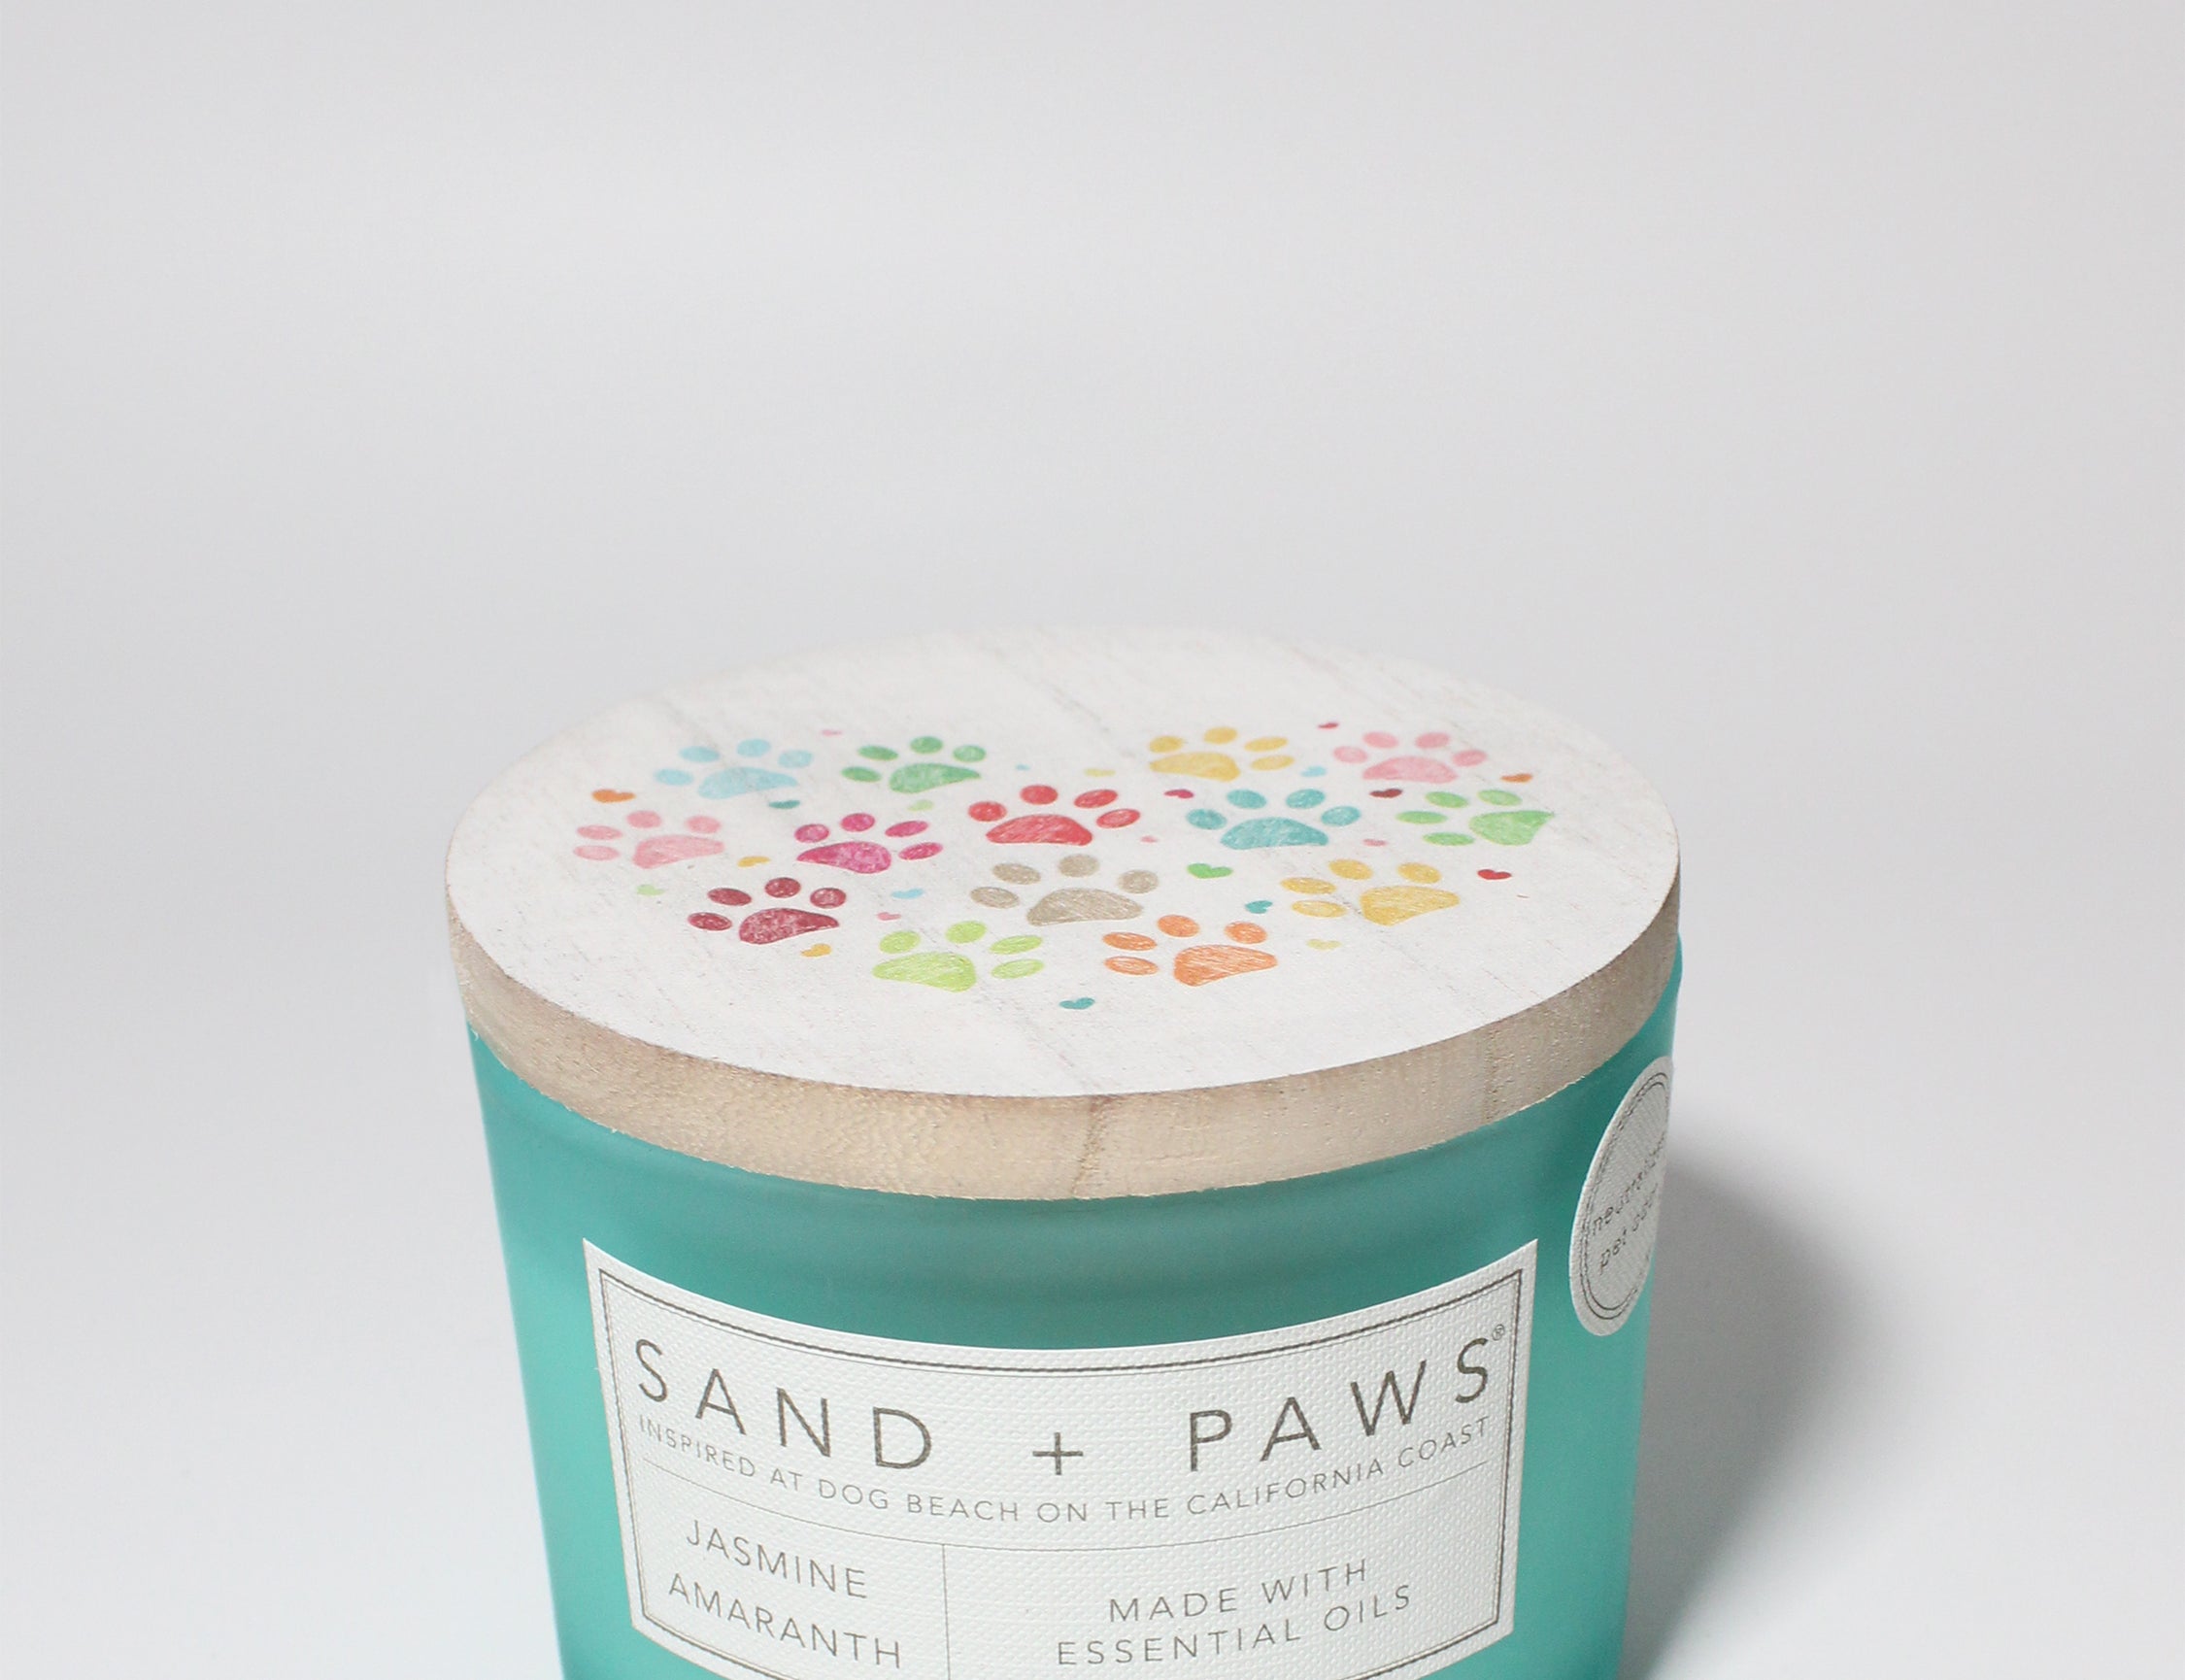 Sand + Paws Jasmine Amaranth 12 oz scented candle Coast vessel with Painted Pawprints heart